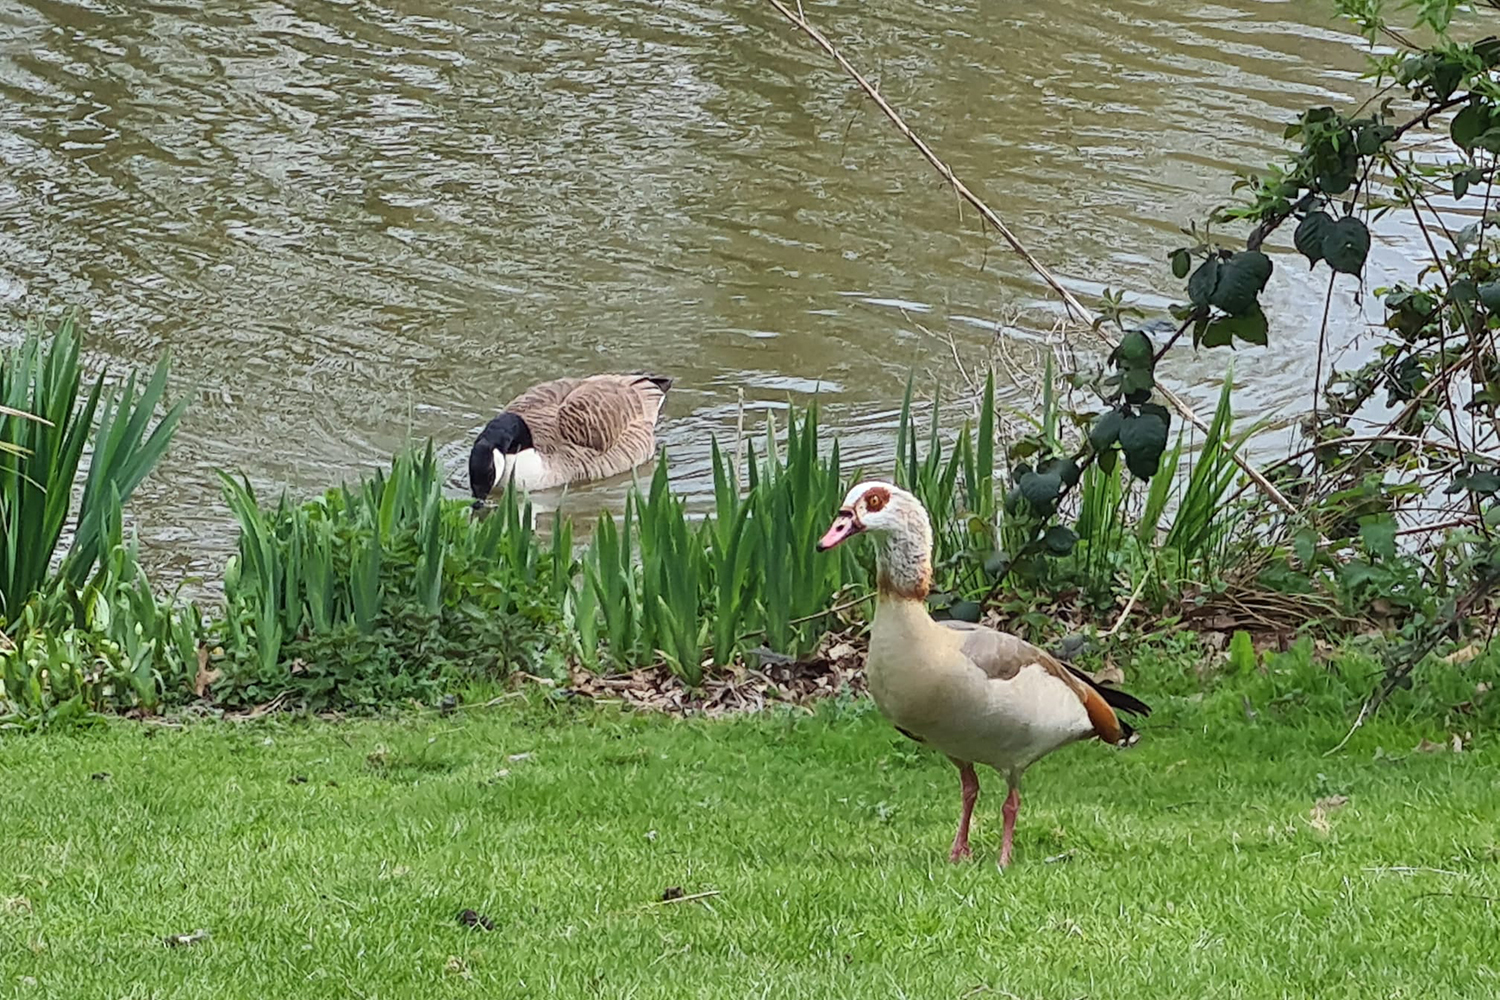 Egyptian and Canadian geese by the lake.